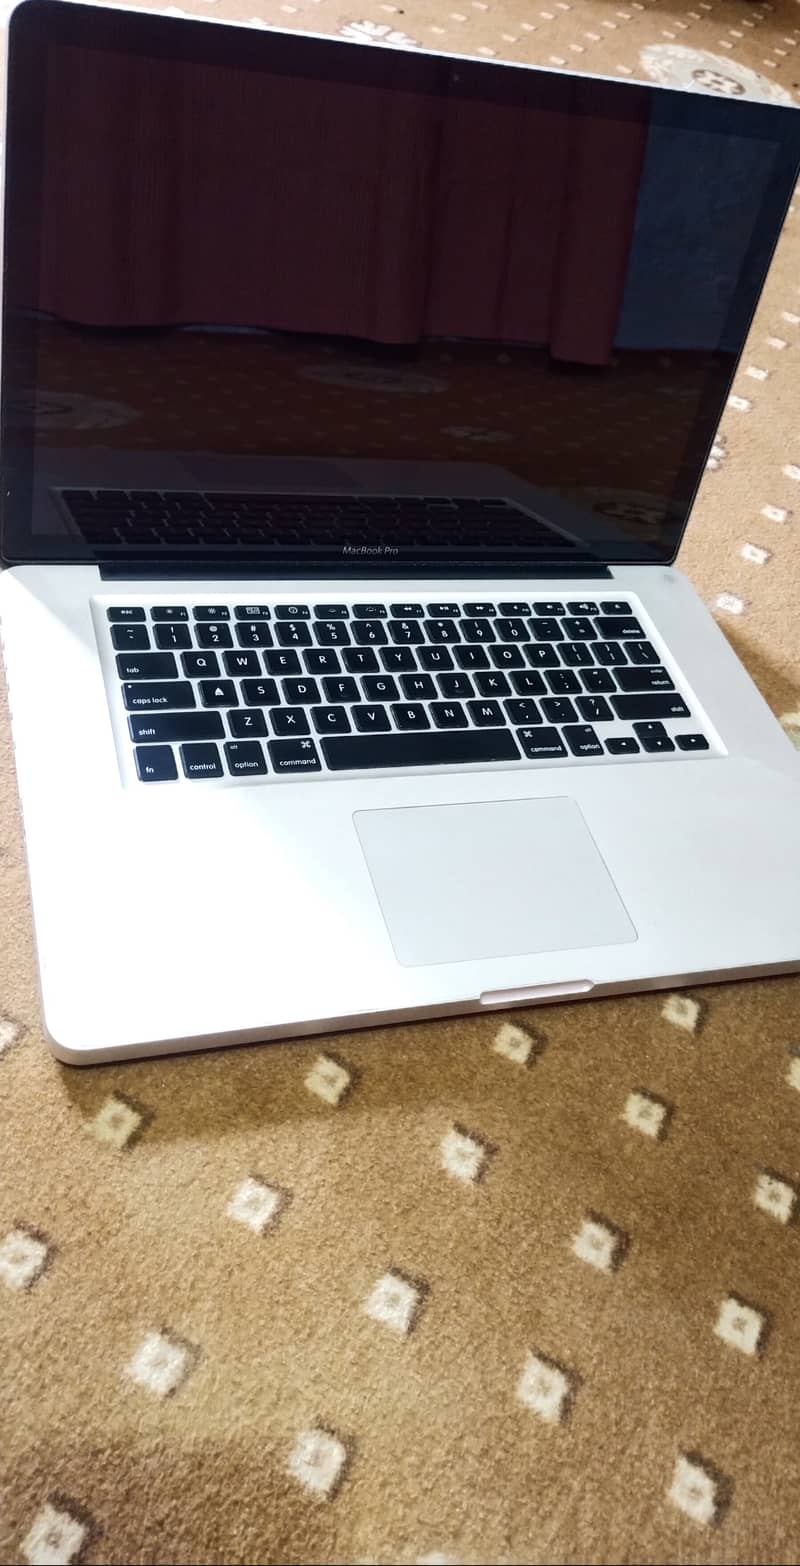 MacBook pro 2011 moled i7 very low price urgent for sale 5